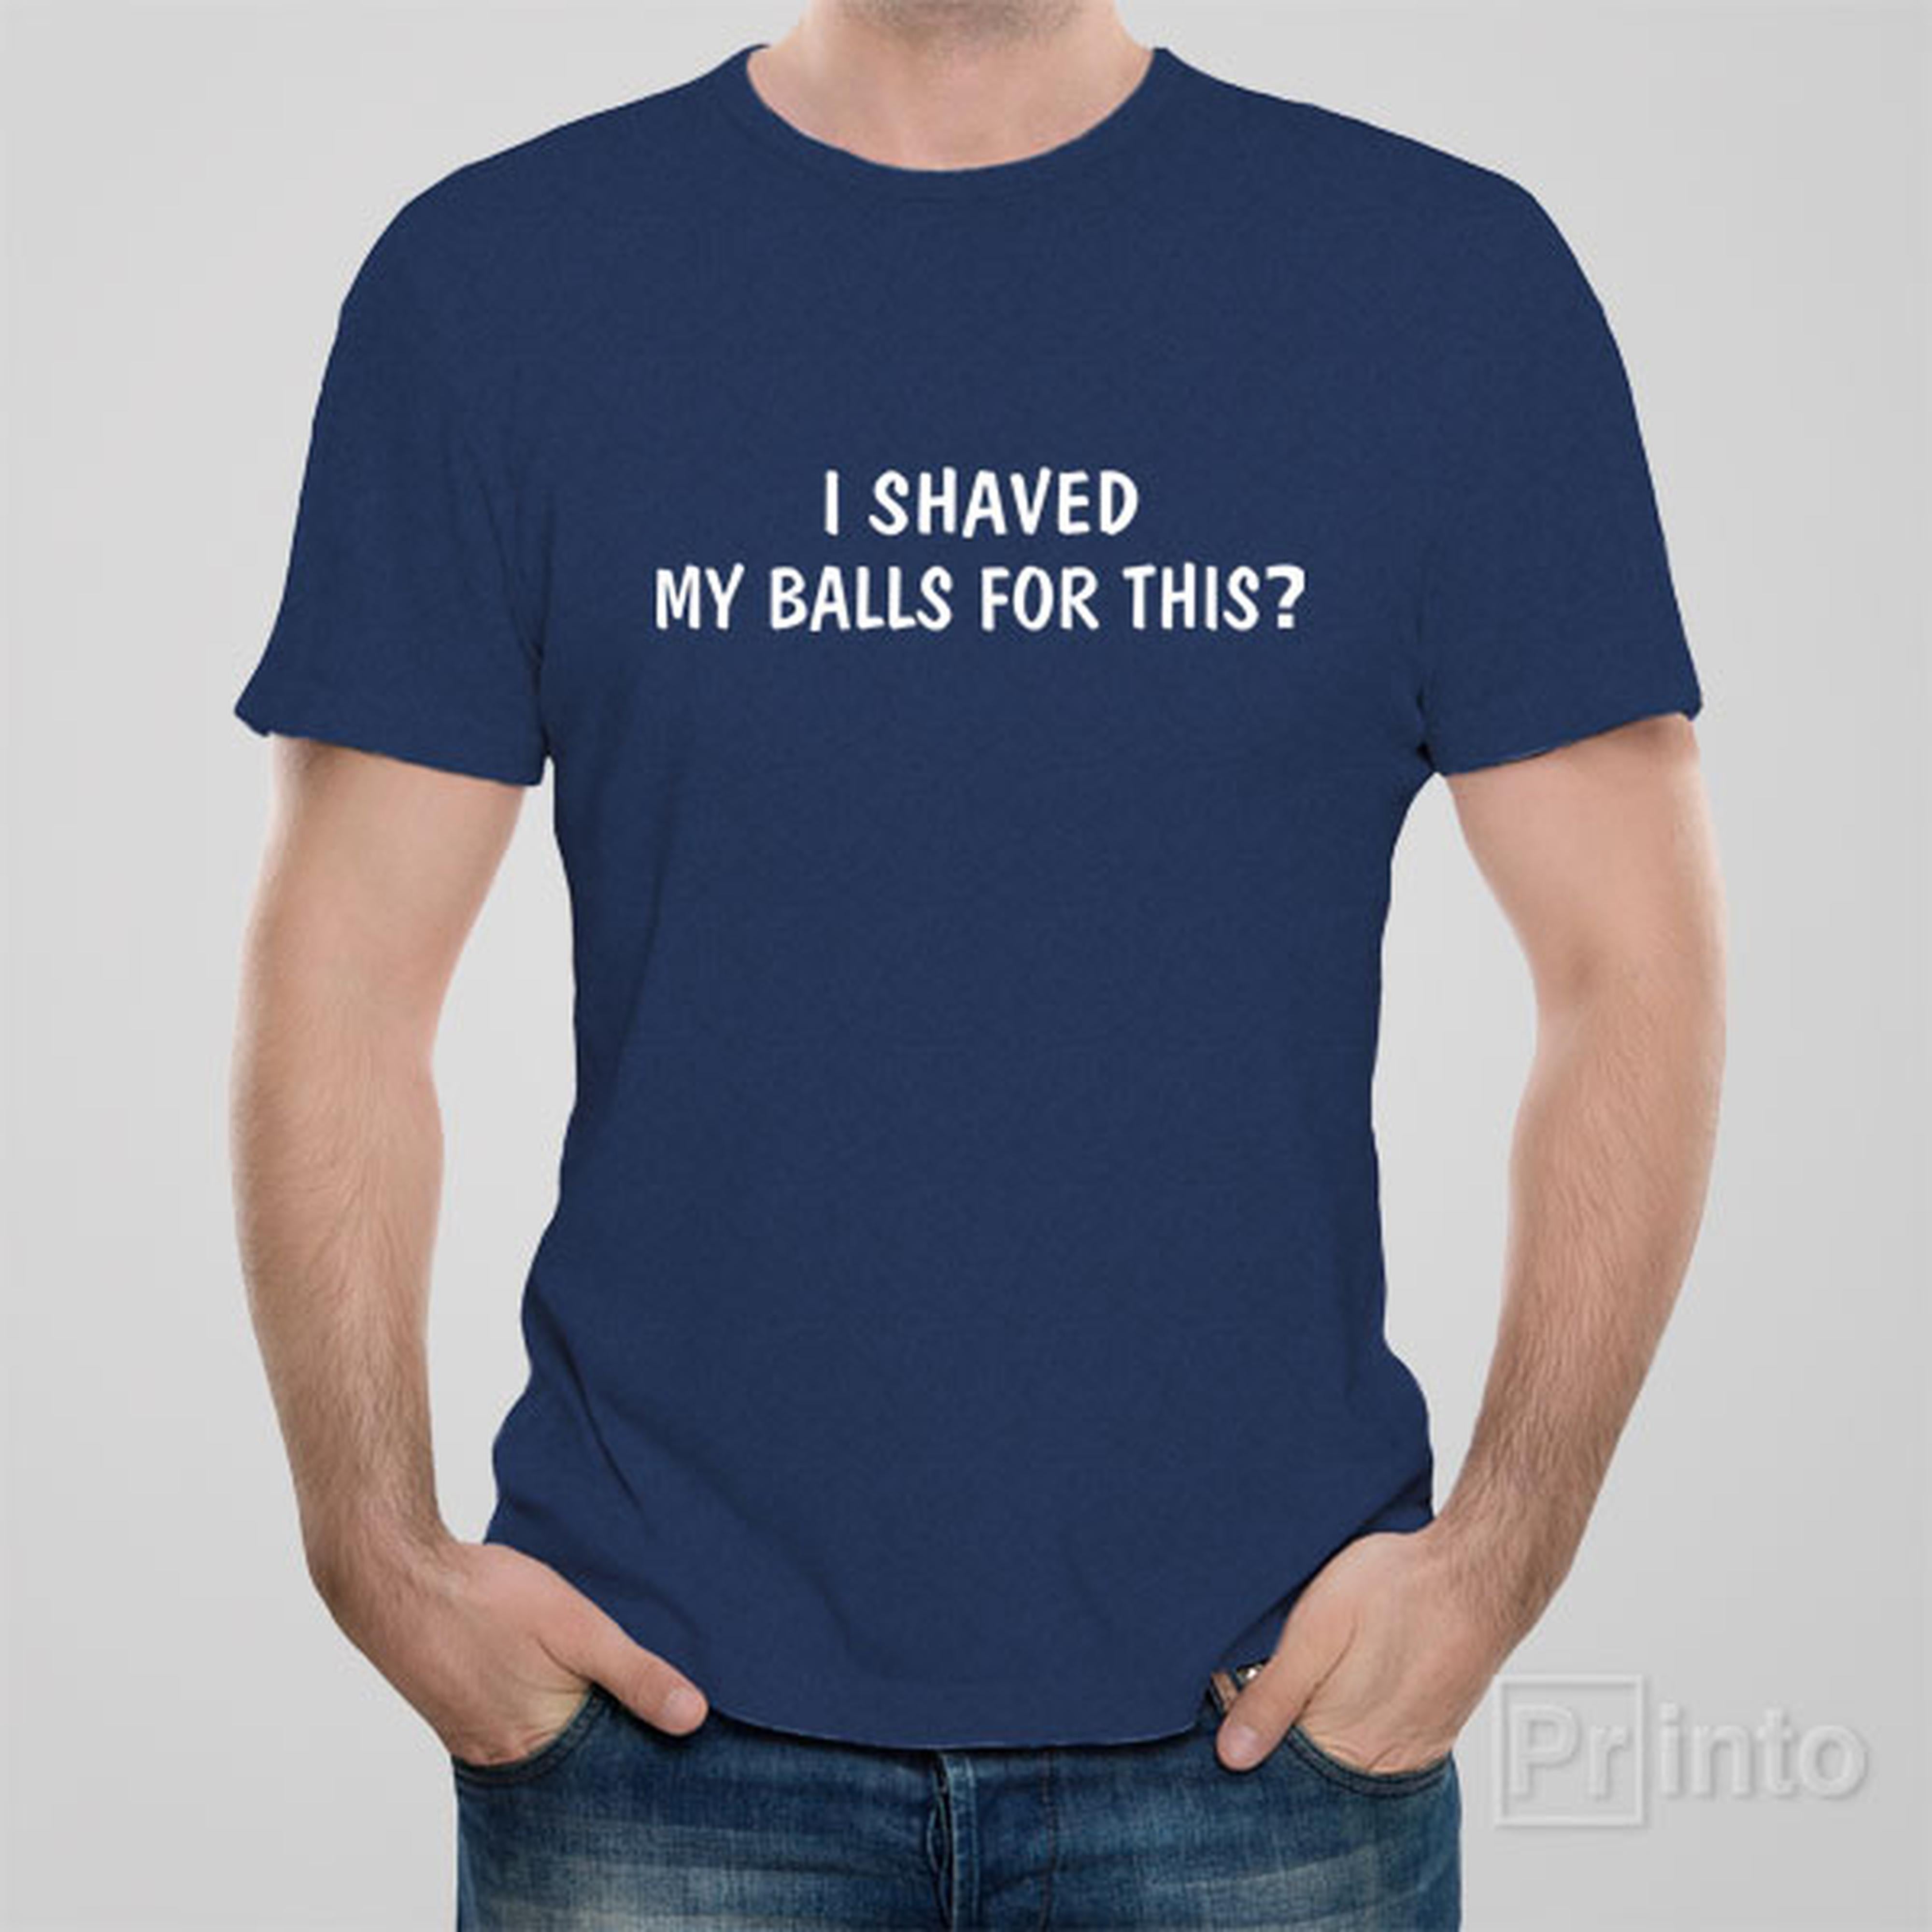 i-shaved-my-balls-for-this-t-shirt